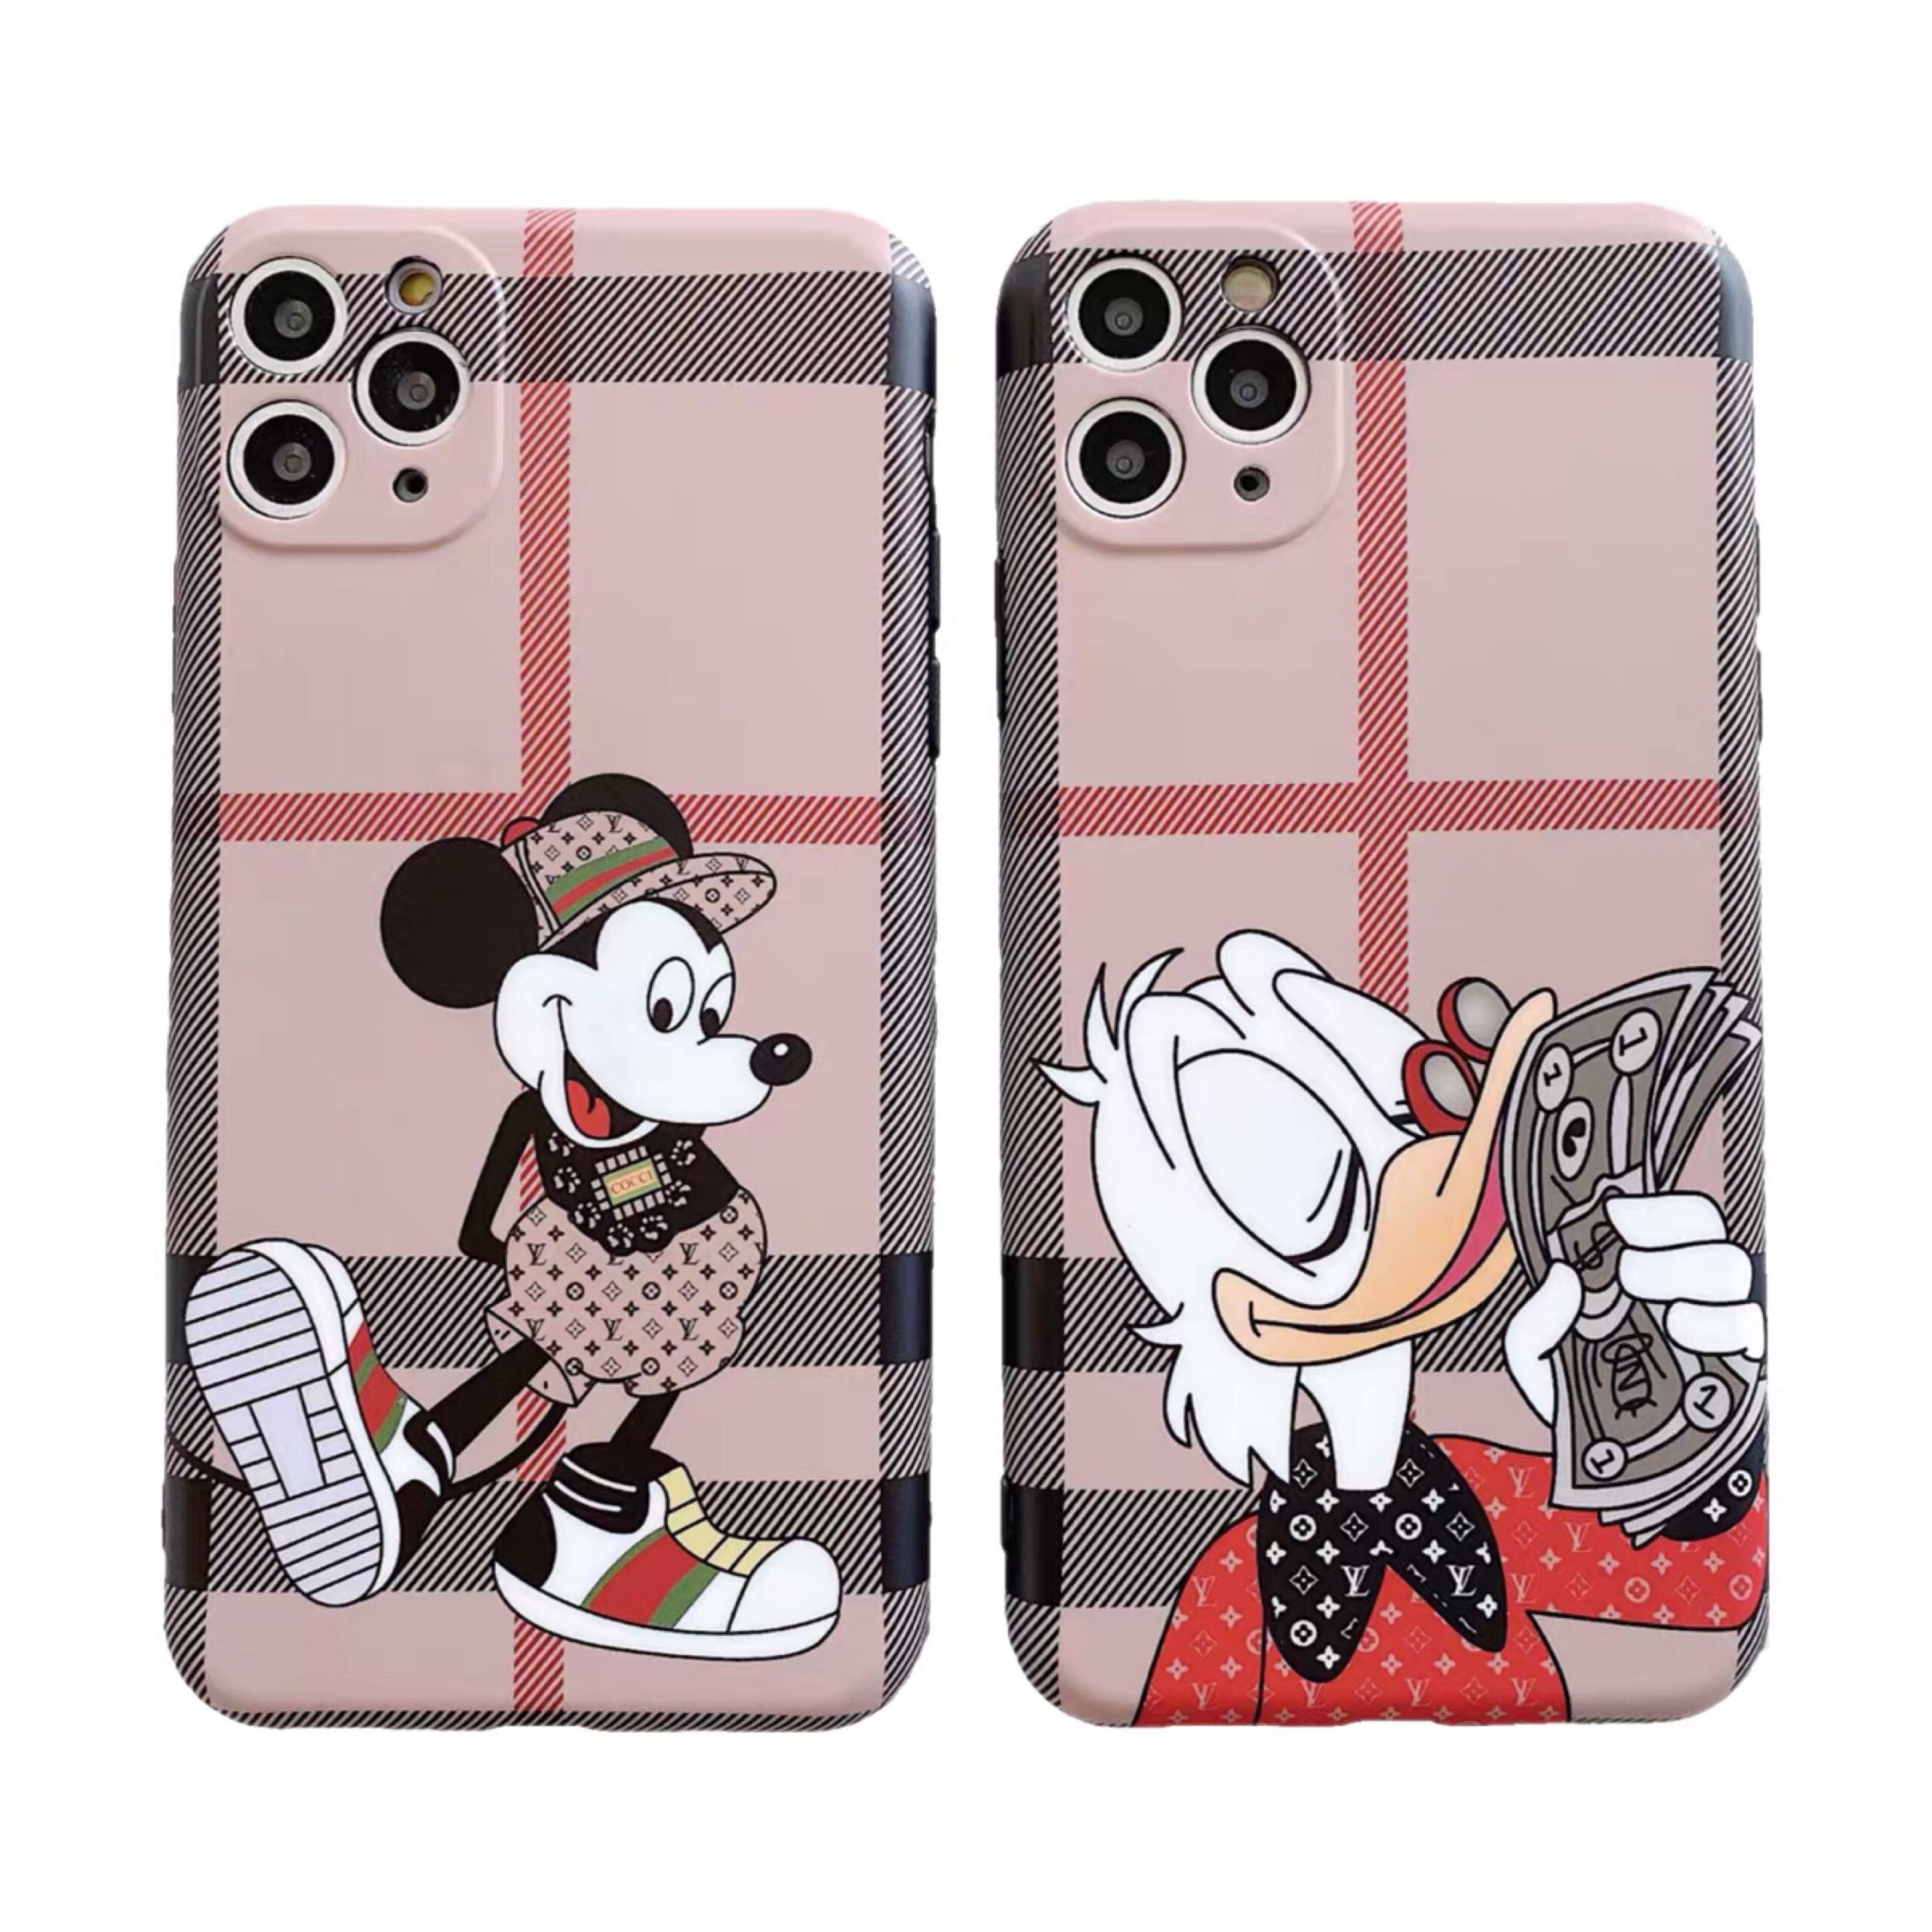 Disney iPhone 11 Case Best Design Covers For iPhone 12